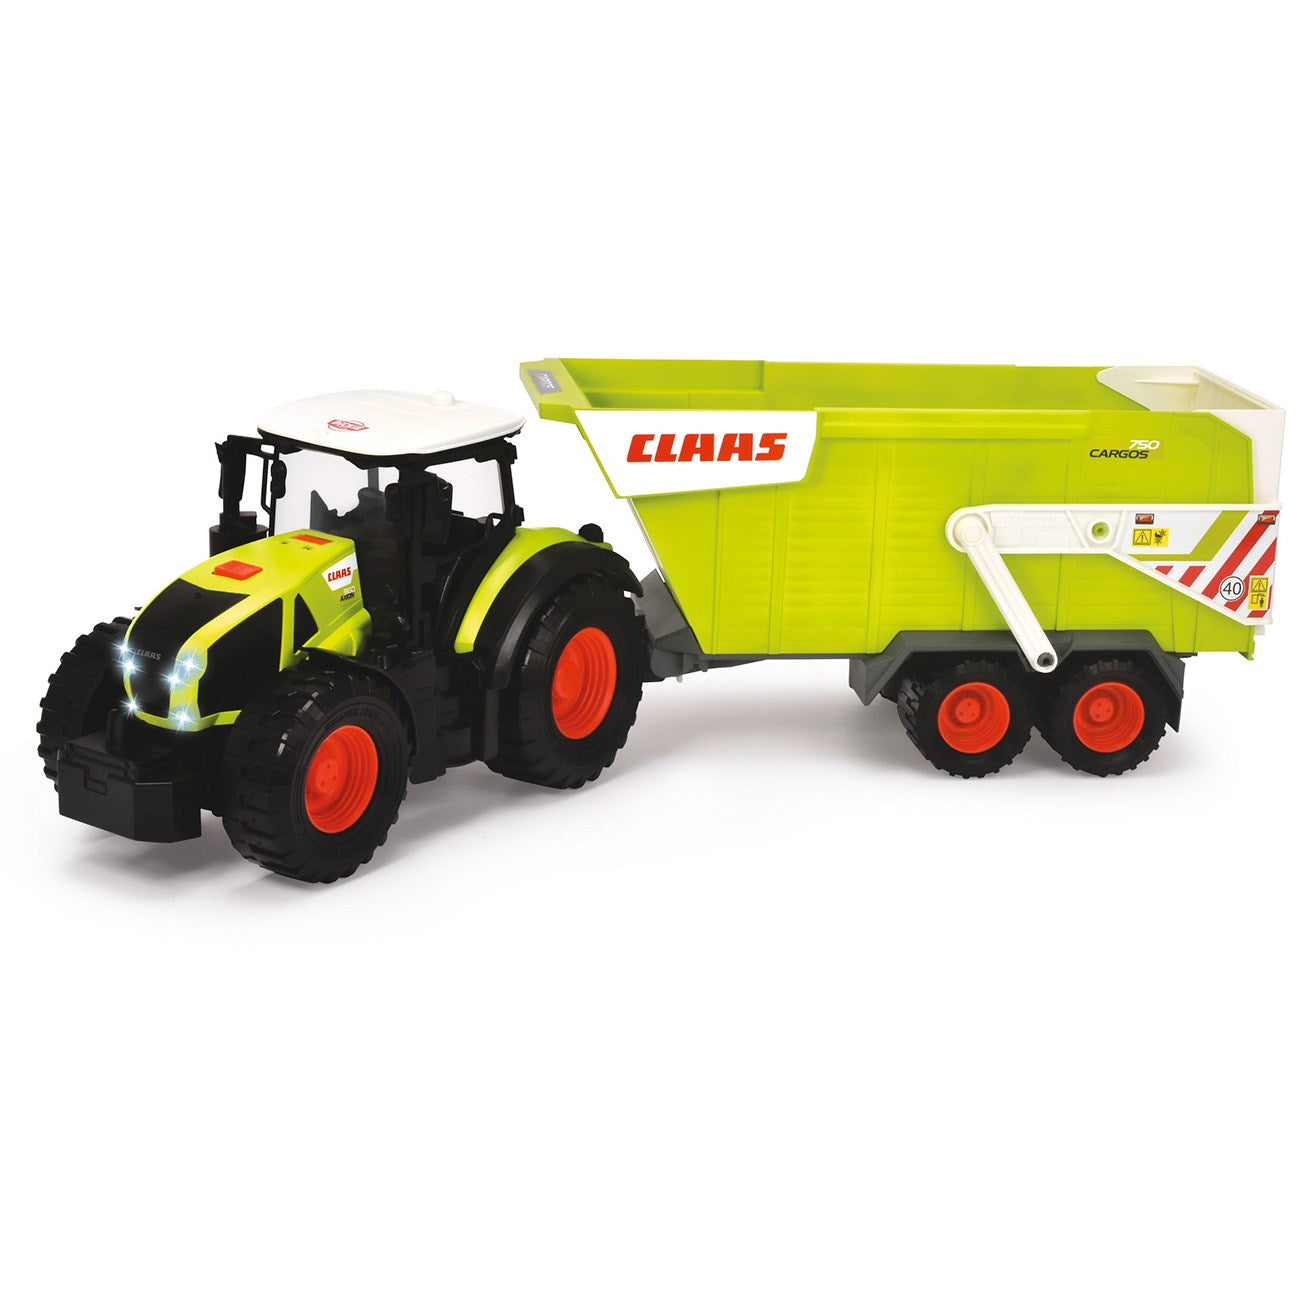 Dickie Toys CLAAS Tractor with Hanger